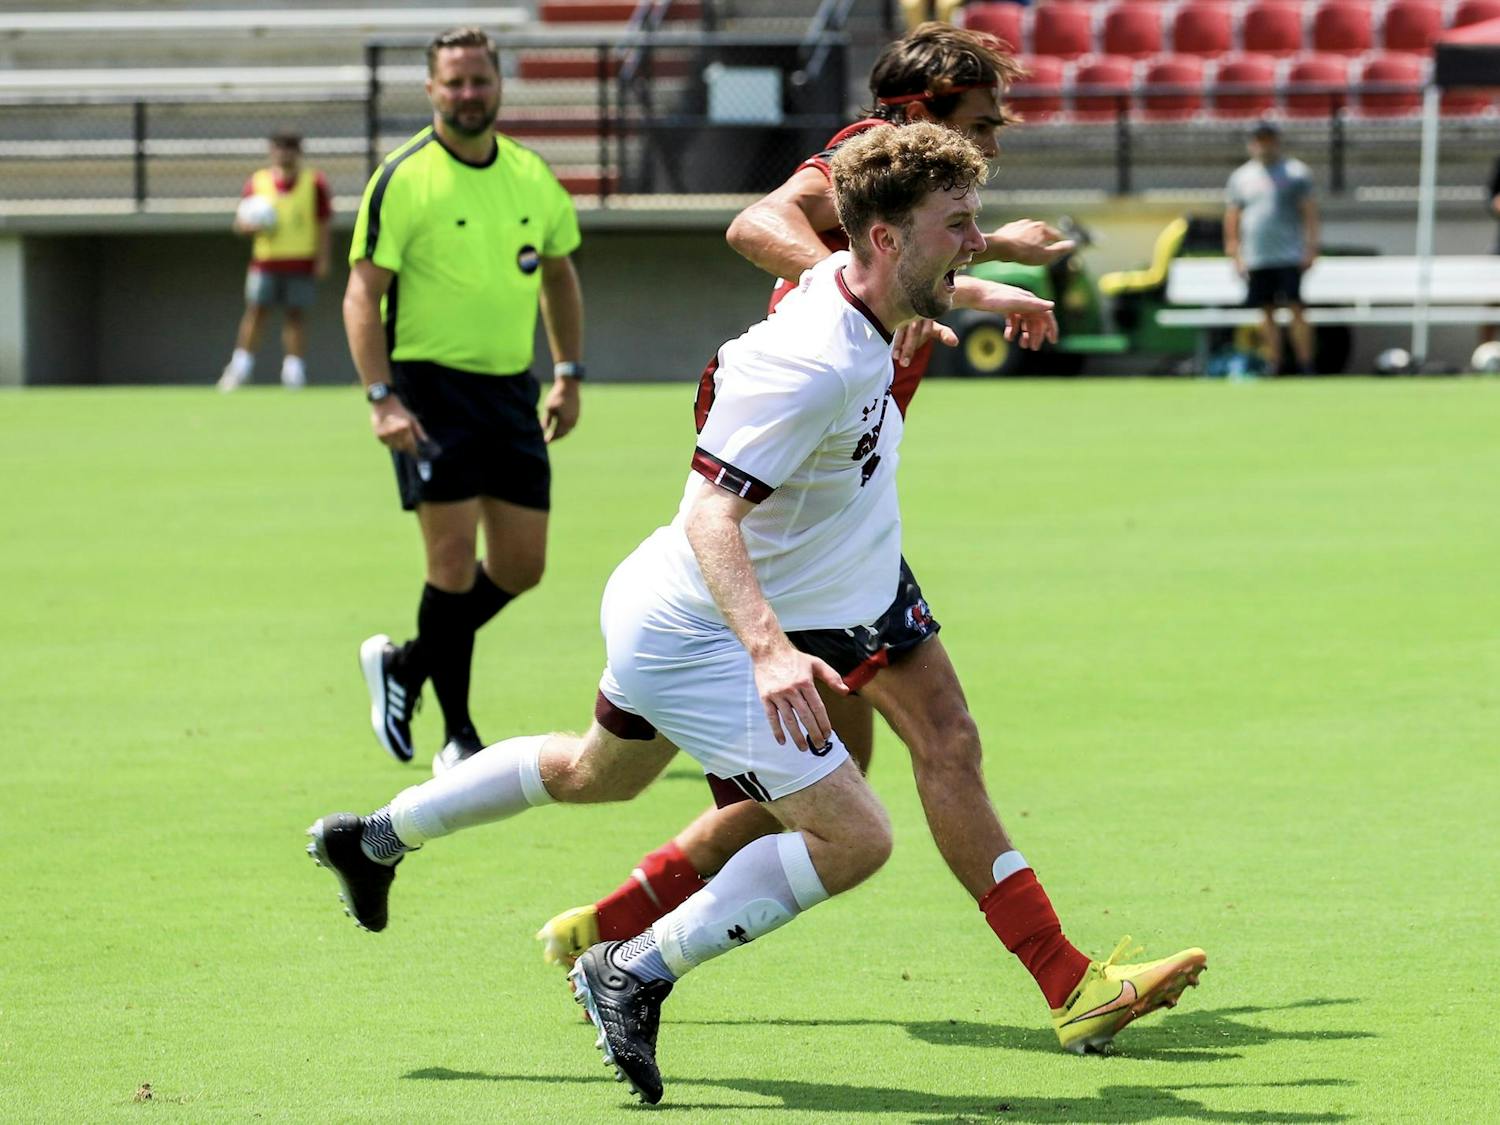 Redshirt sophomore midfielder Jack Burgess fights for the ball during the match against Gardner-Webb on Aug. 27, 2023. The Bulldogs defeated the Gamecocks 2-0 at Eugene E. Stone III Stadium.